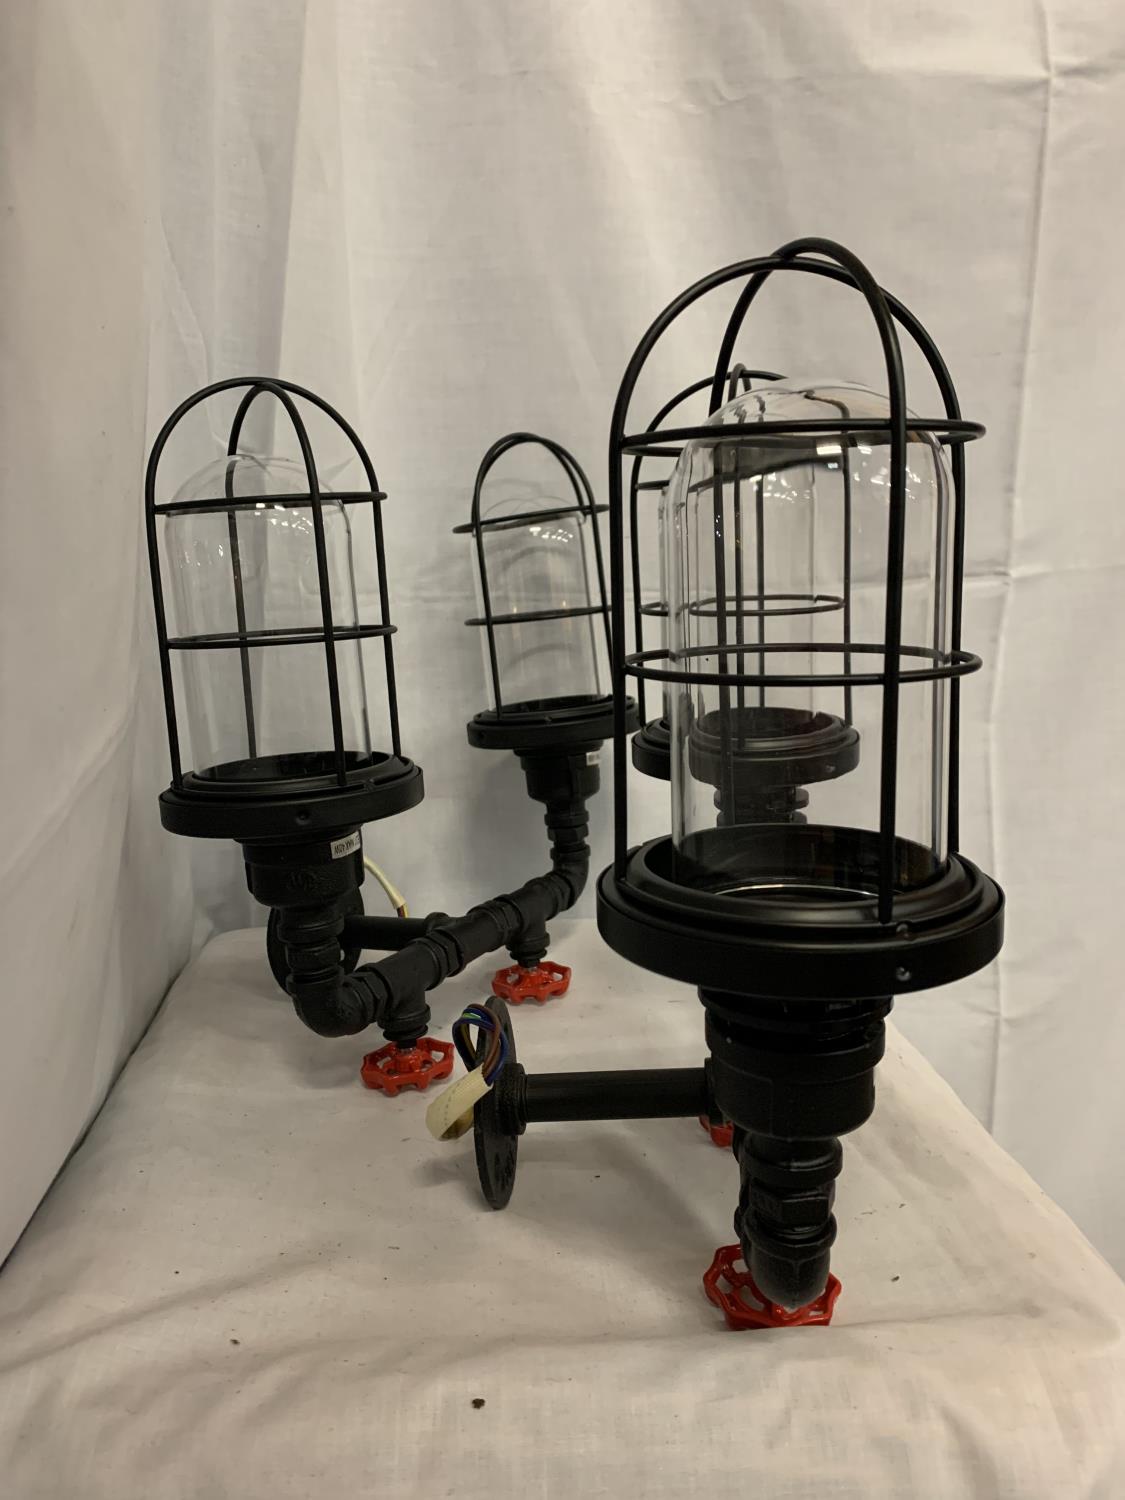 A PAIR OF INDUSTRIAL STYLE TWIN WALL LIGHTS WITH CAGED SHADES AND STEAM PIPE WITH TAPS EFFECT - Image 3 of 3